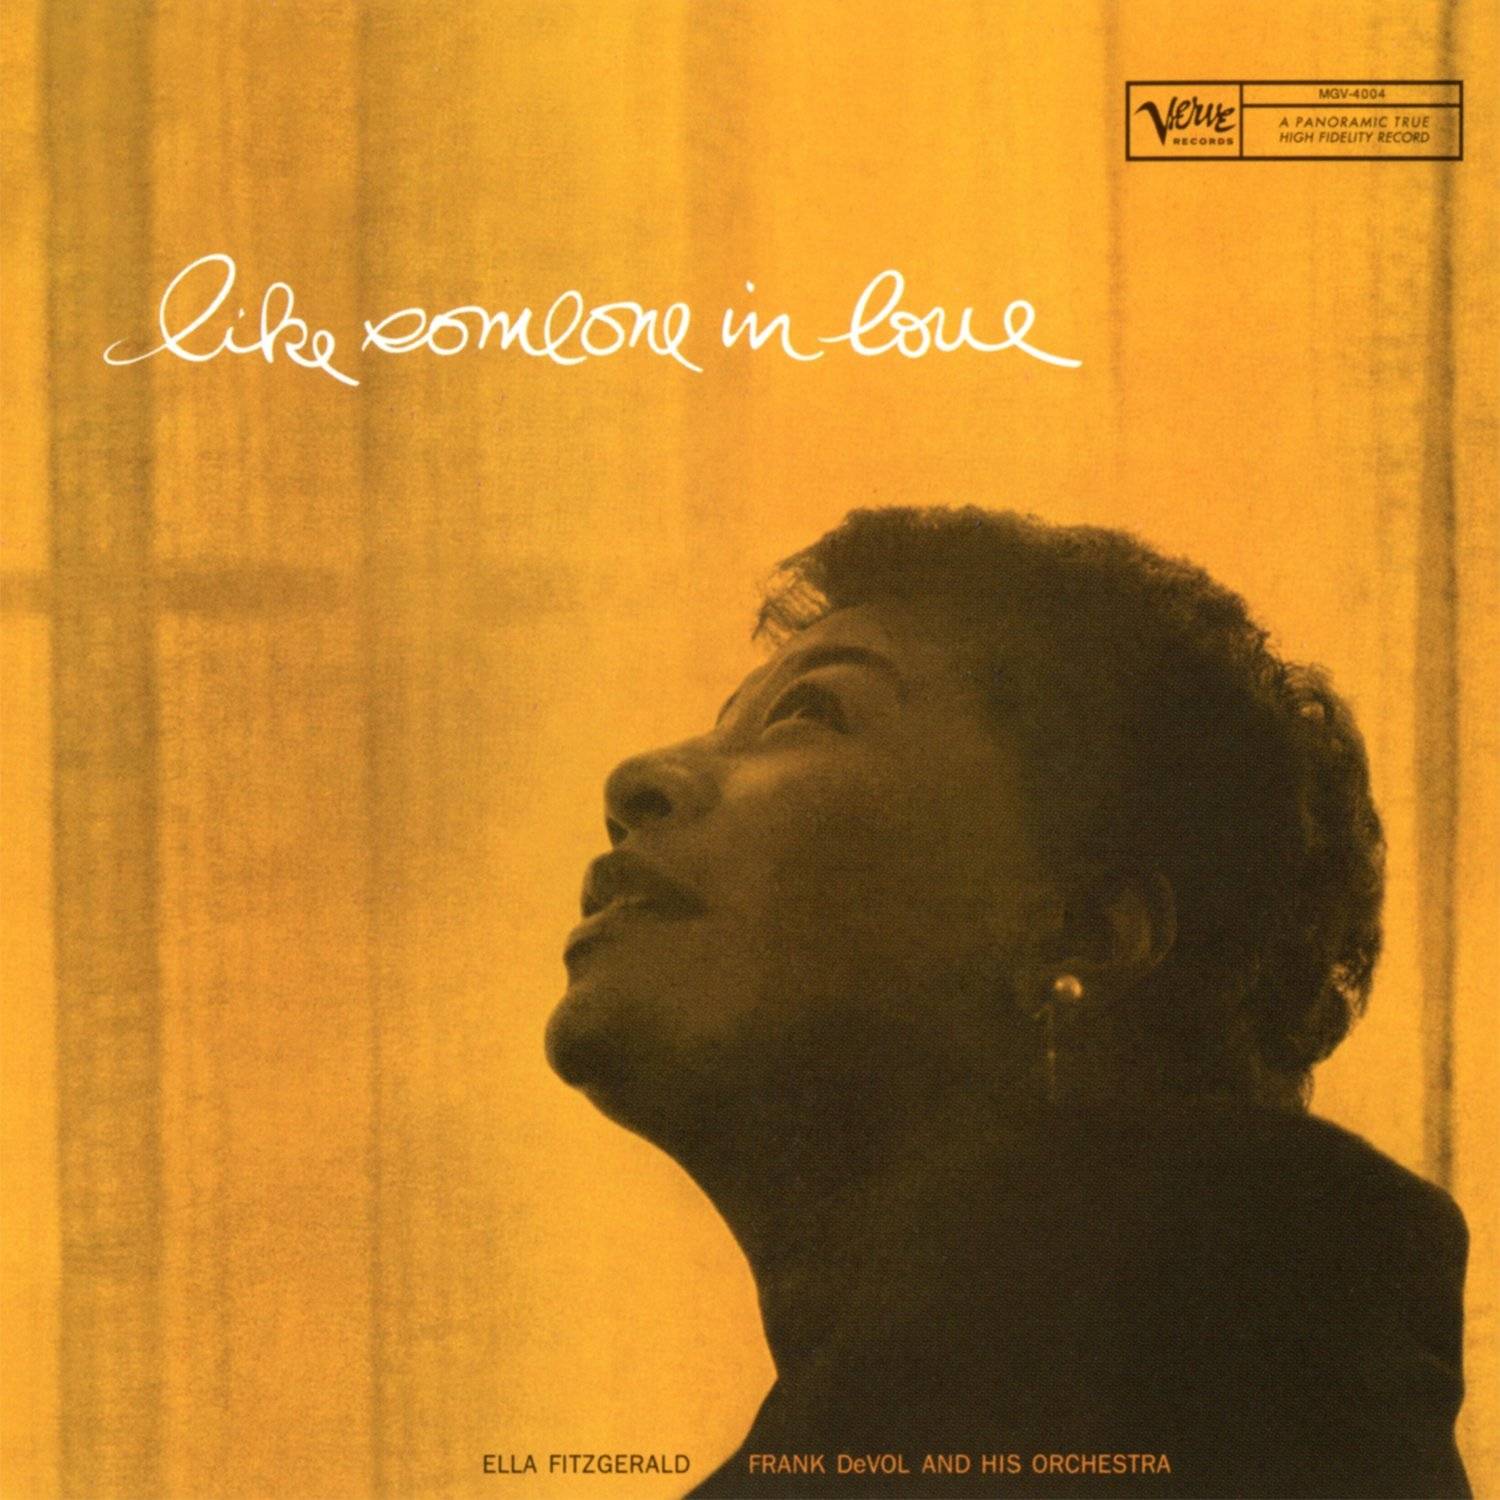 Ella Fitzgerald – Like Someone In Love (1957) [Analogue Productions 2011] SACD ISO + FLAC 24bit/44,1kHz